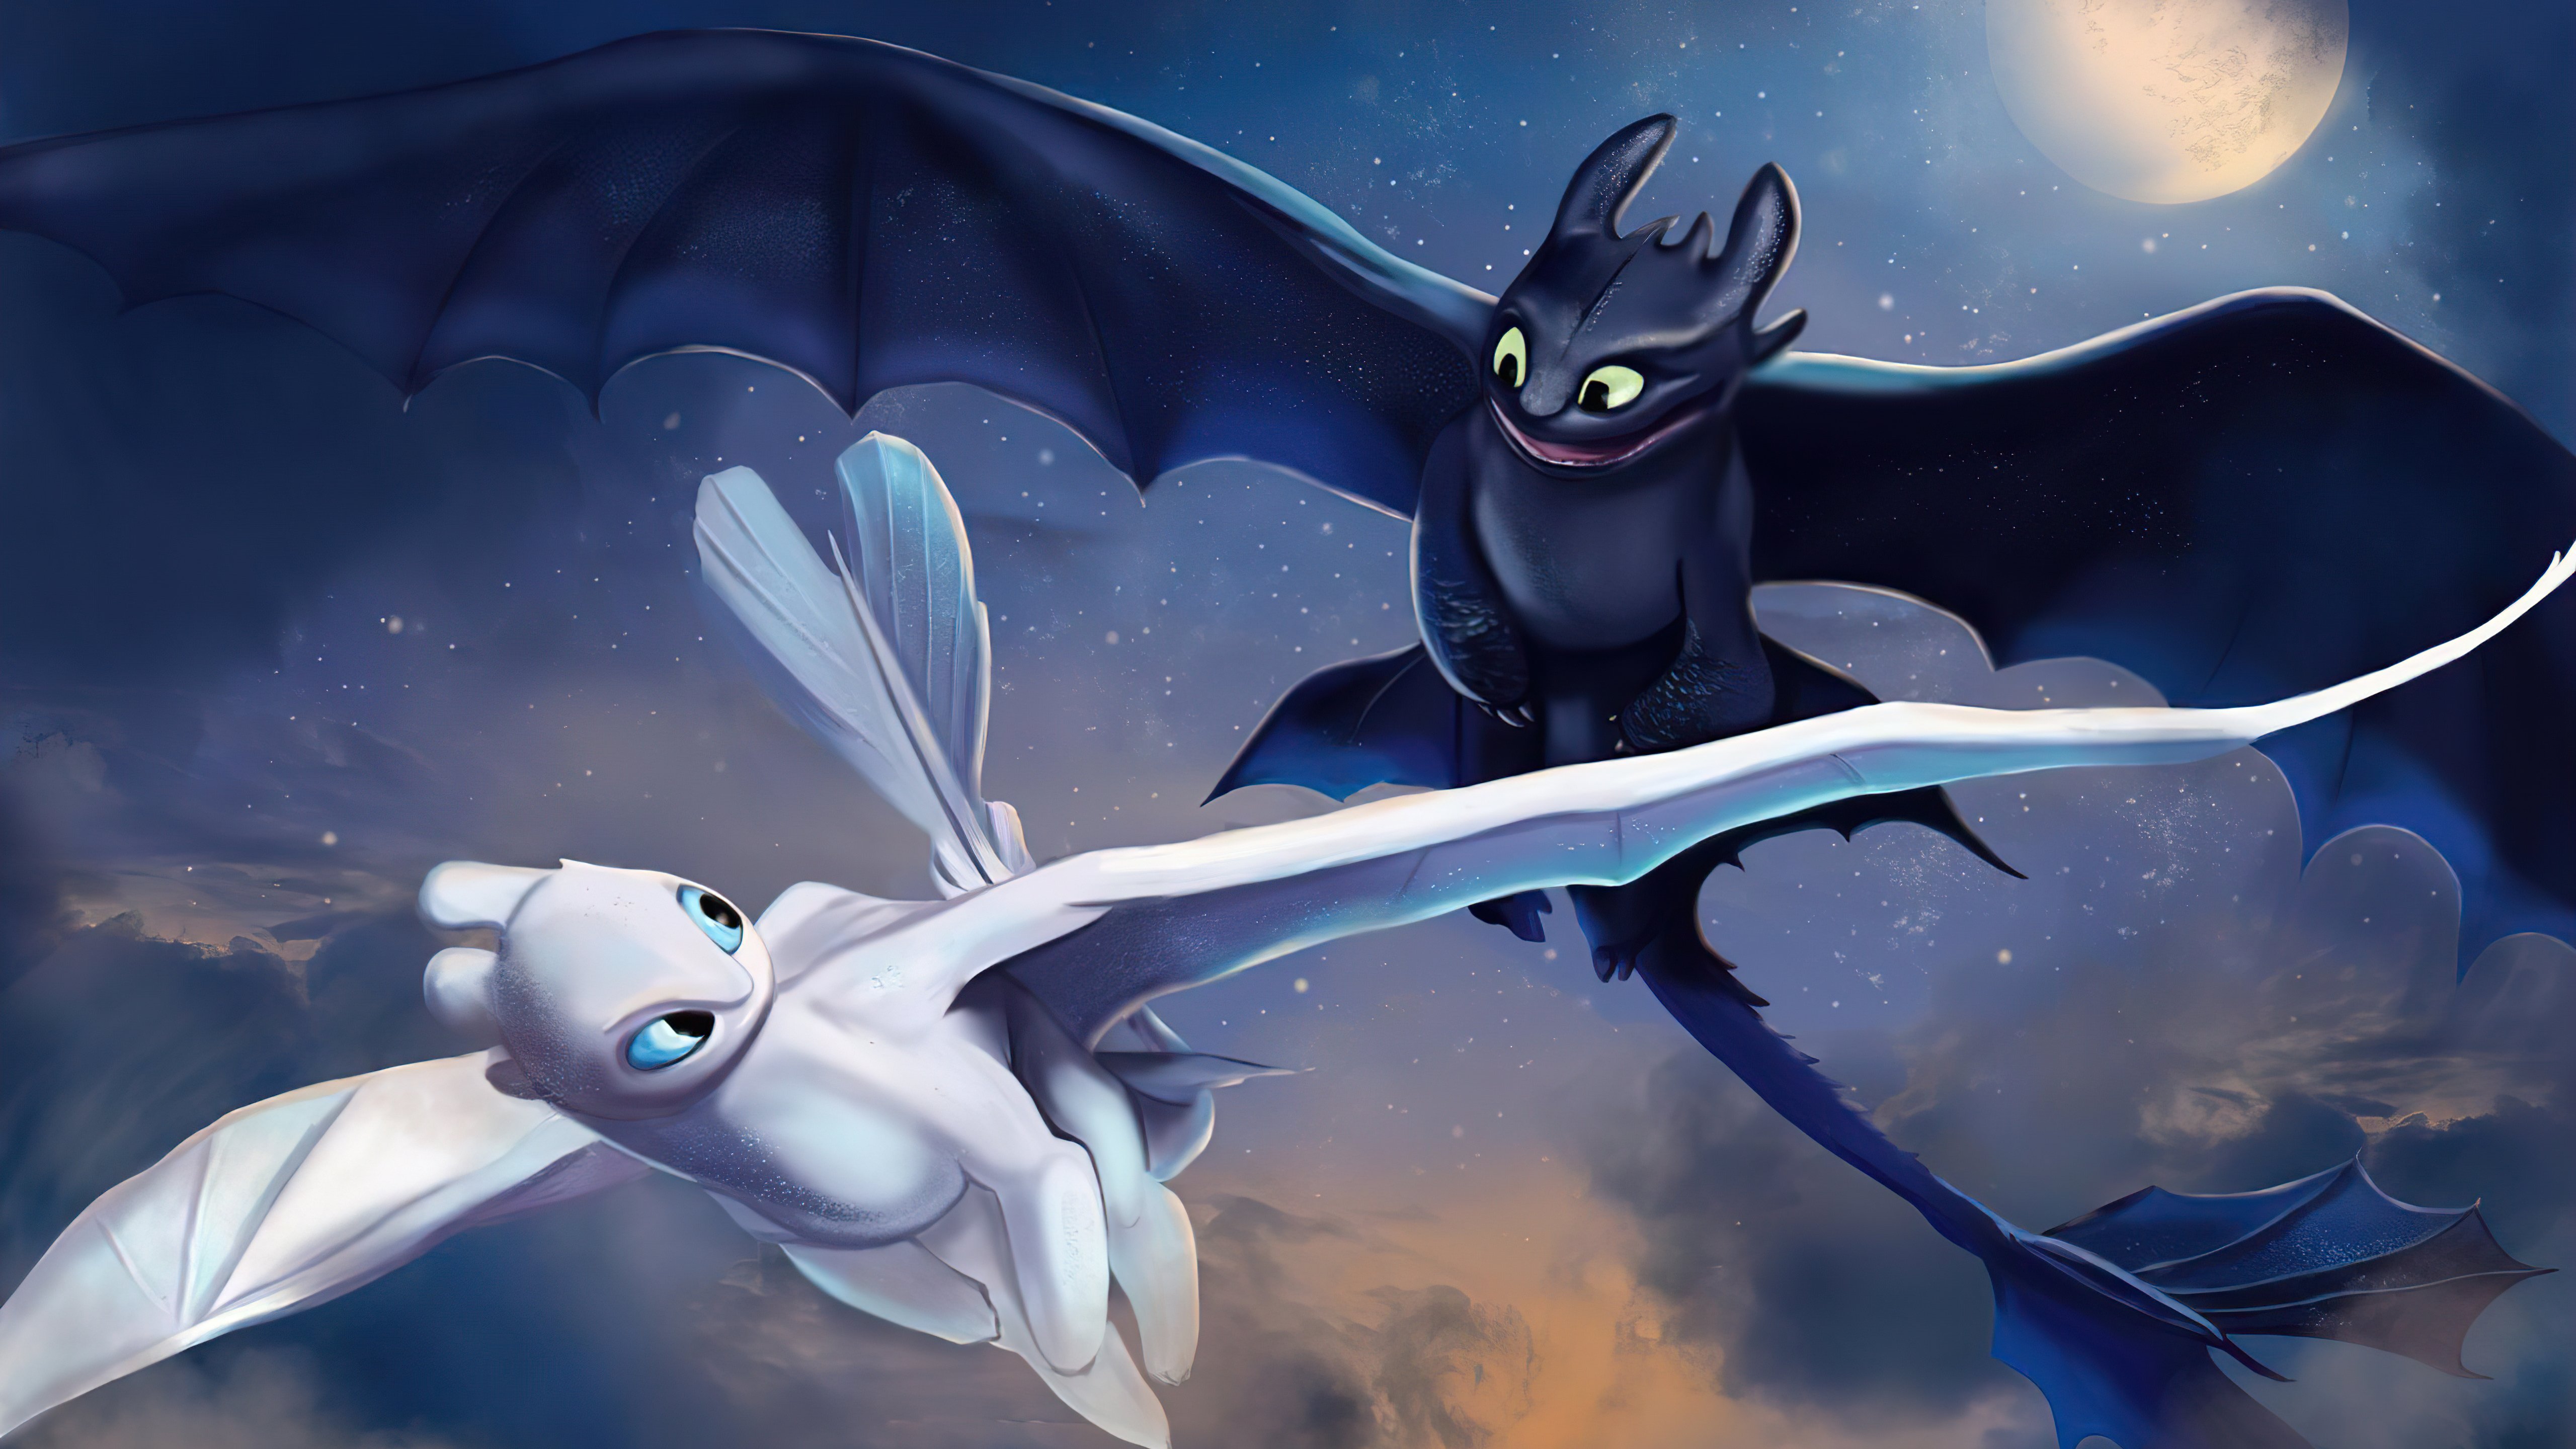 Wallpaper Toothless and Light Fury.